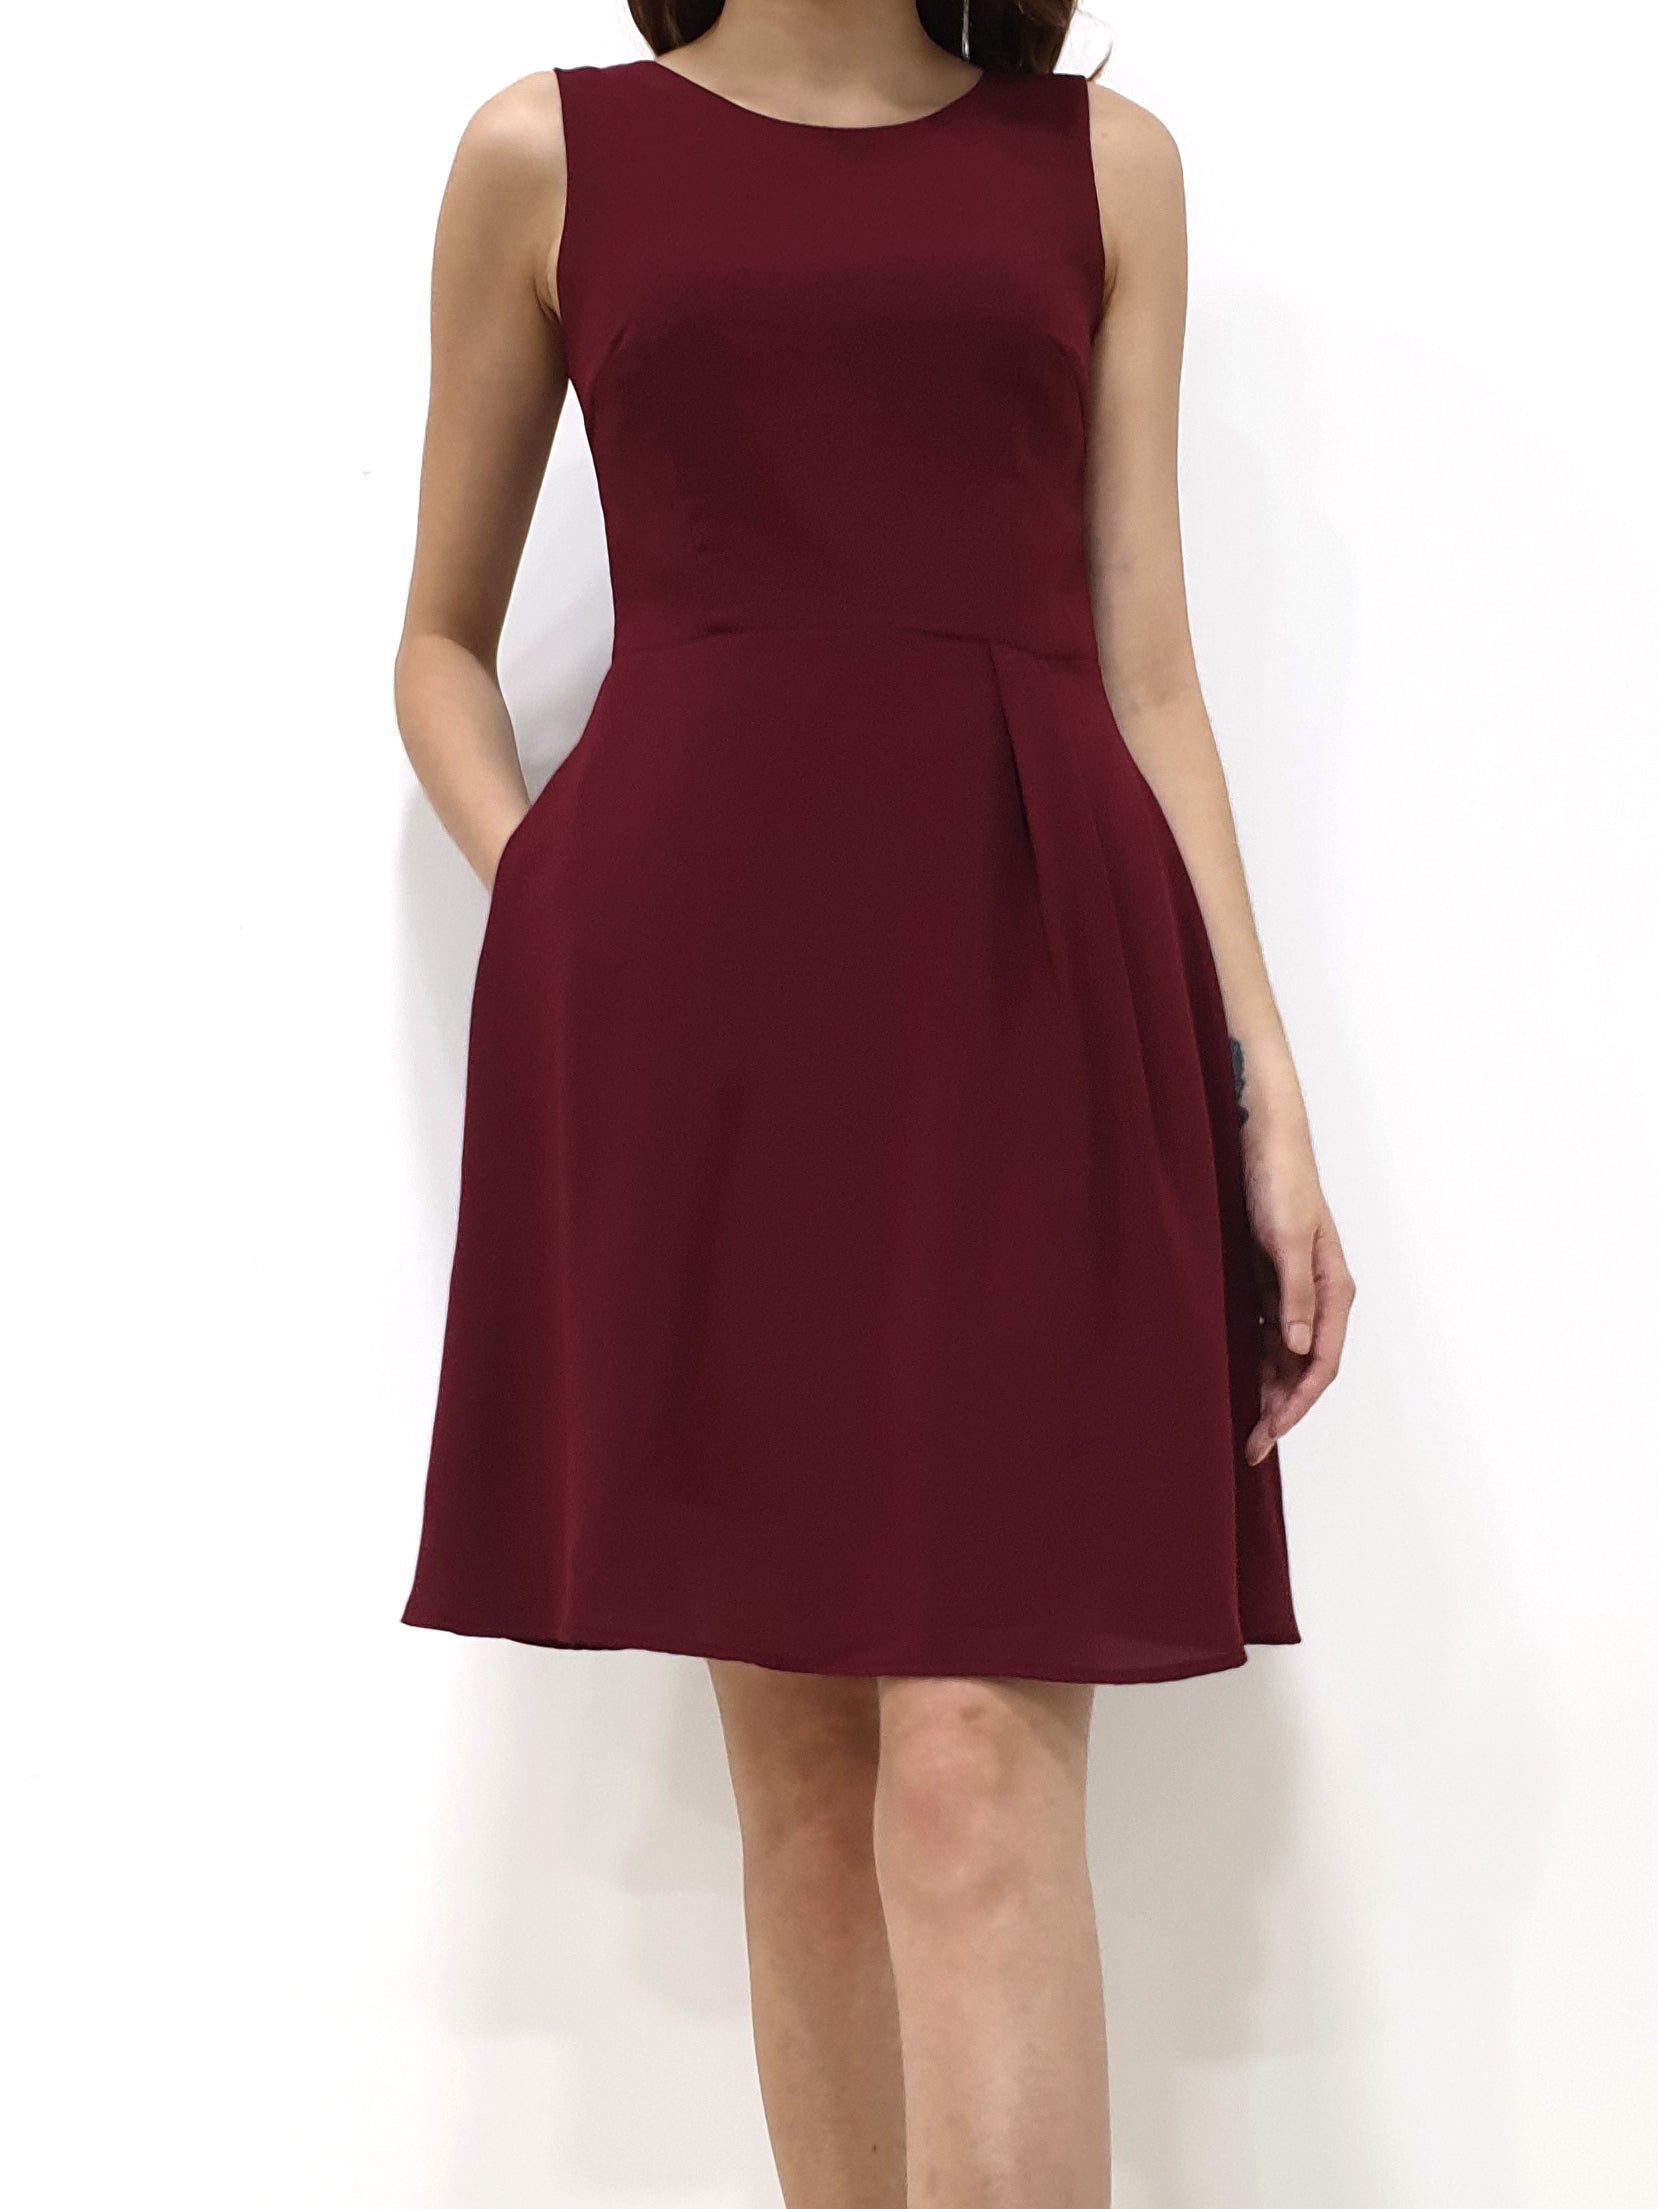 Round Neck A Line Dress - Maroon (Non-returnable) - Ferlicious